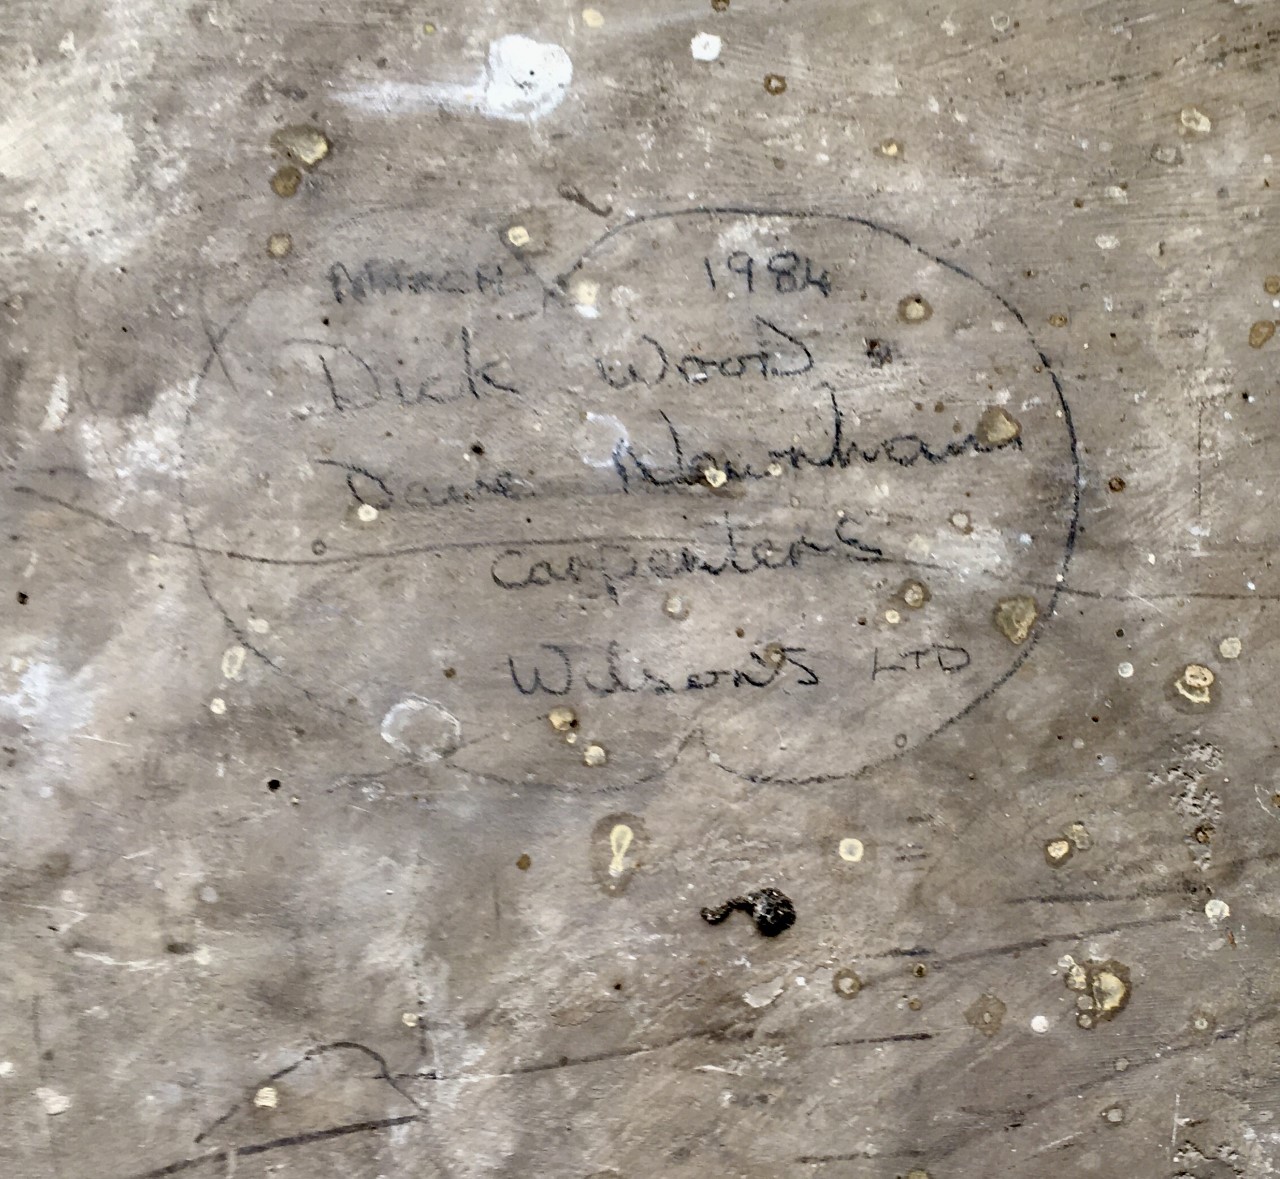 A close up photograph of a note written on the wall of the studio at Charleston by carpenters in 1984. The carpenters have signed their names and dated it.